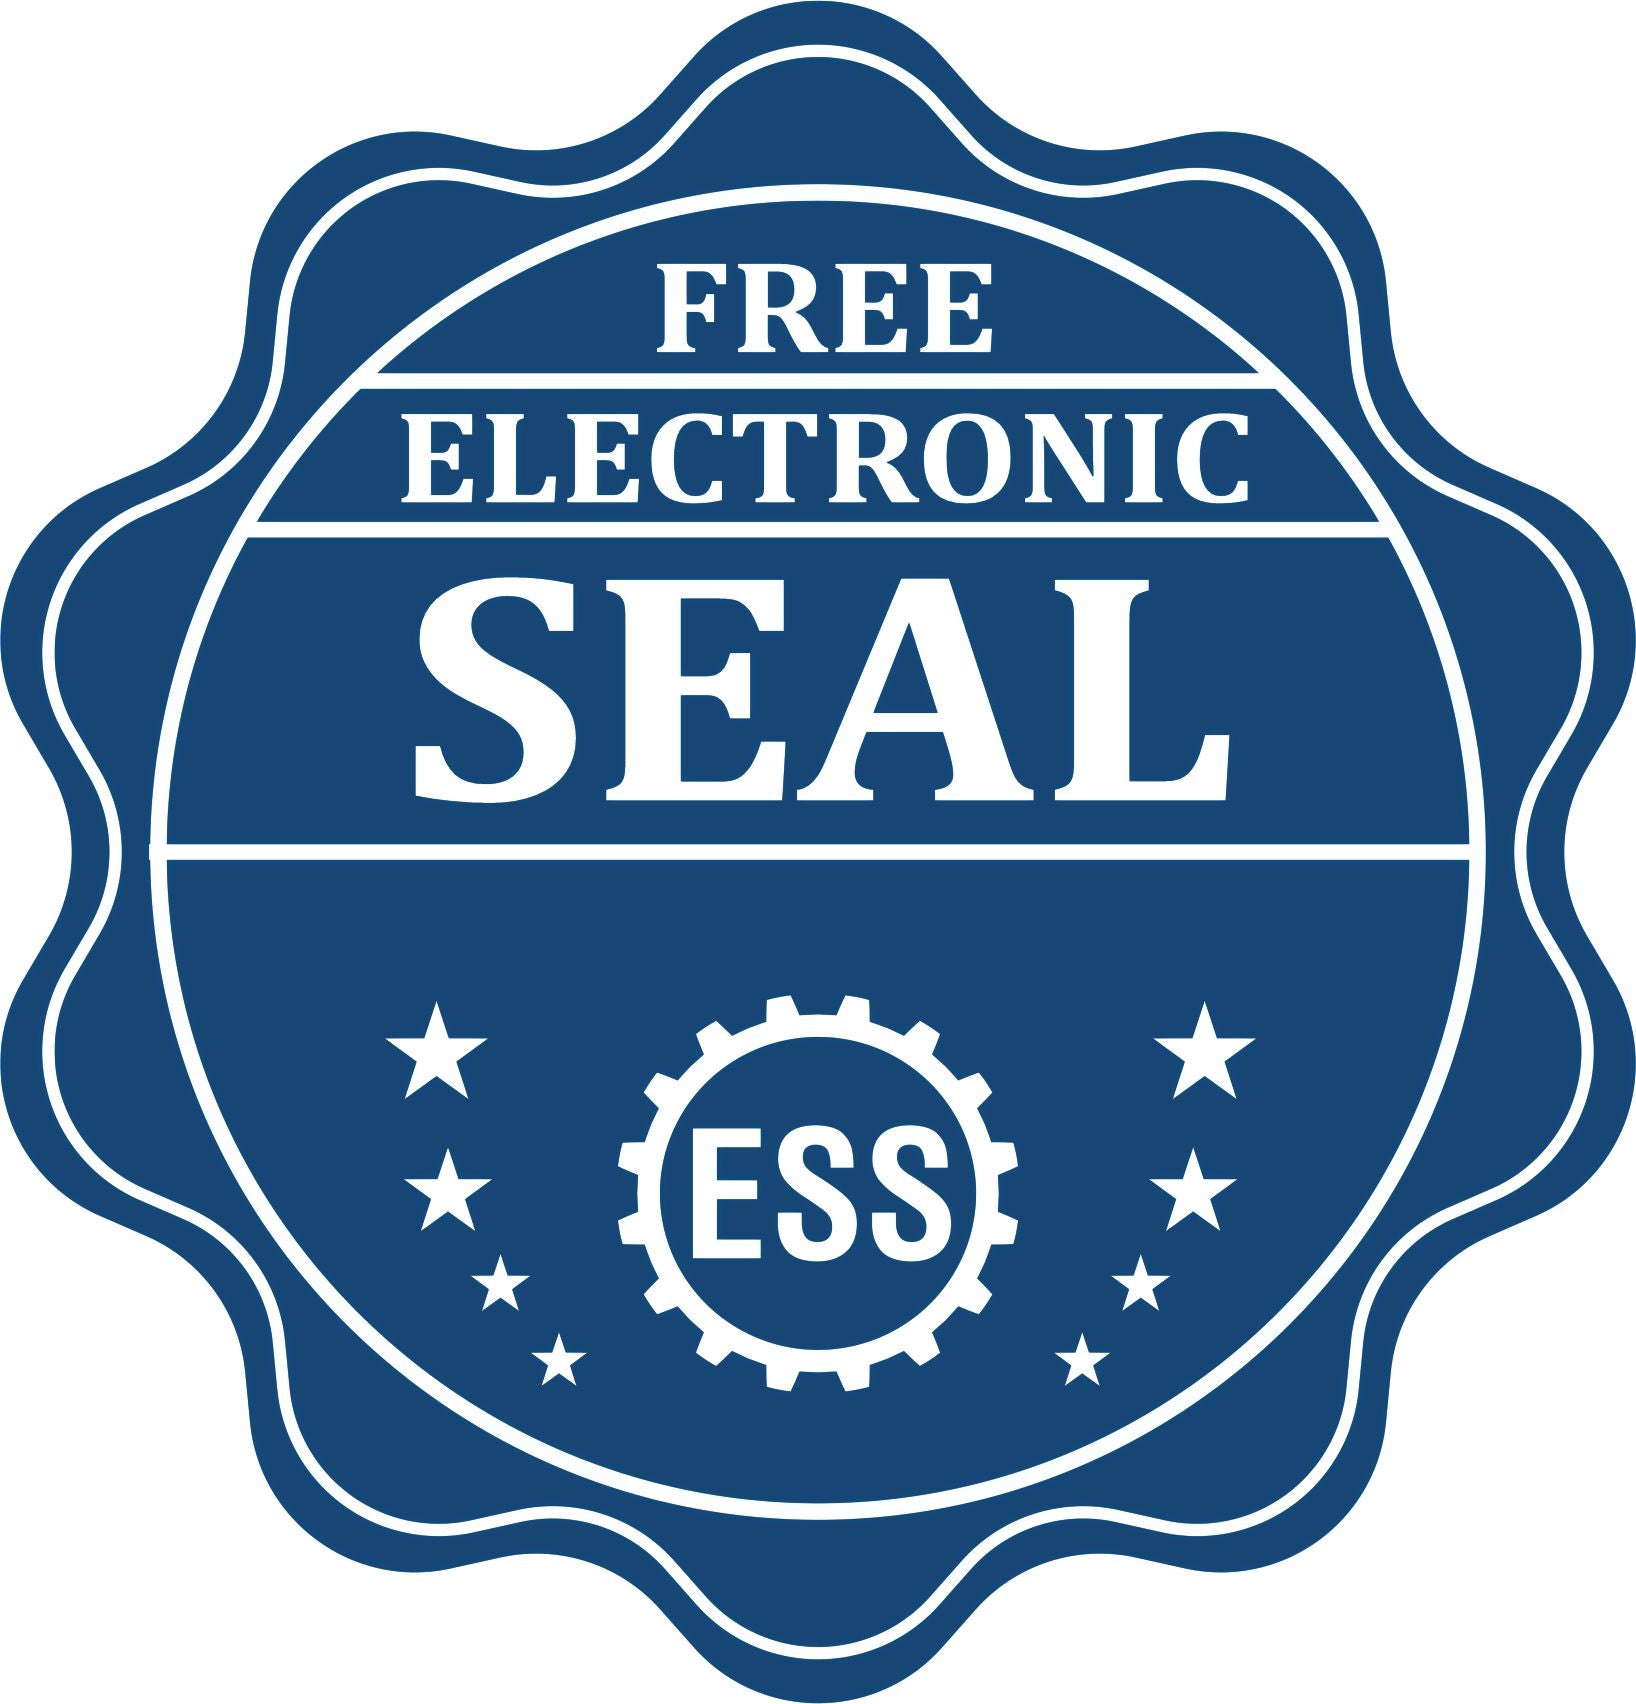 A badge showing a free electronic seal for the Slim Pre-Inked Georgia Landscape Architect Seal Stamp with stars and the ESS gear on the emblem.